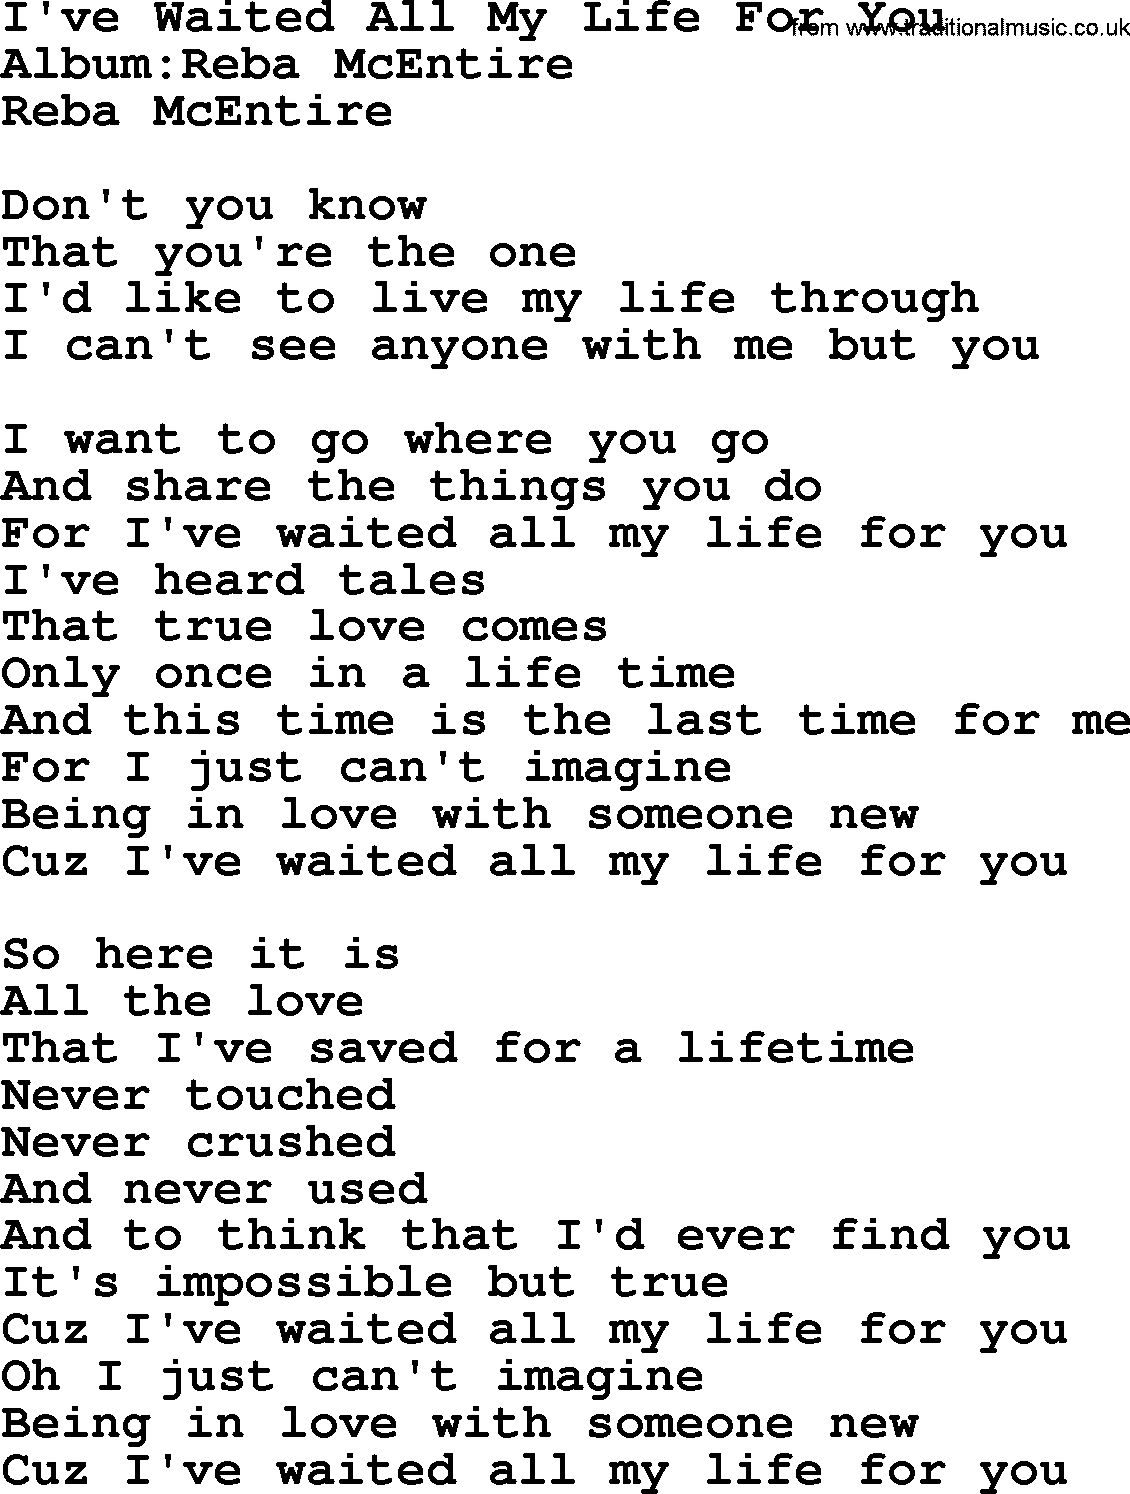 Reba McEntire song: I've Waited All My Life For You lyrics